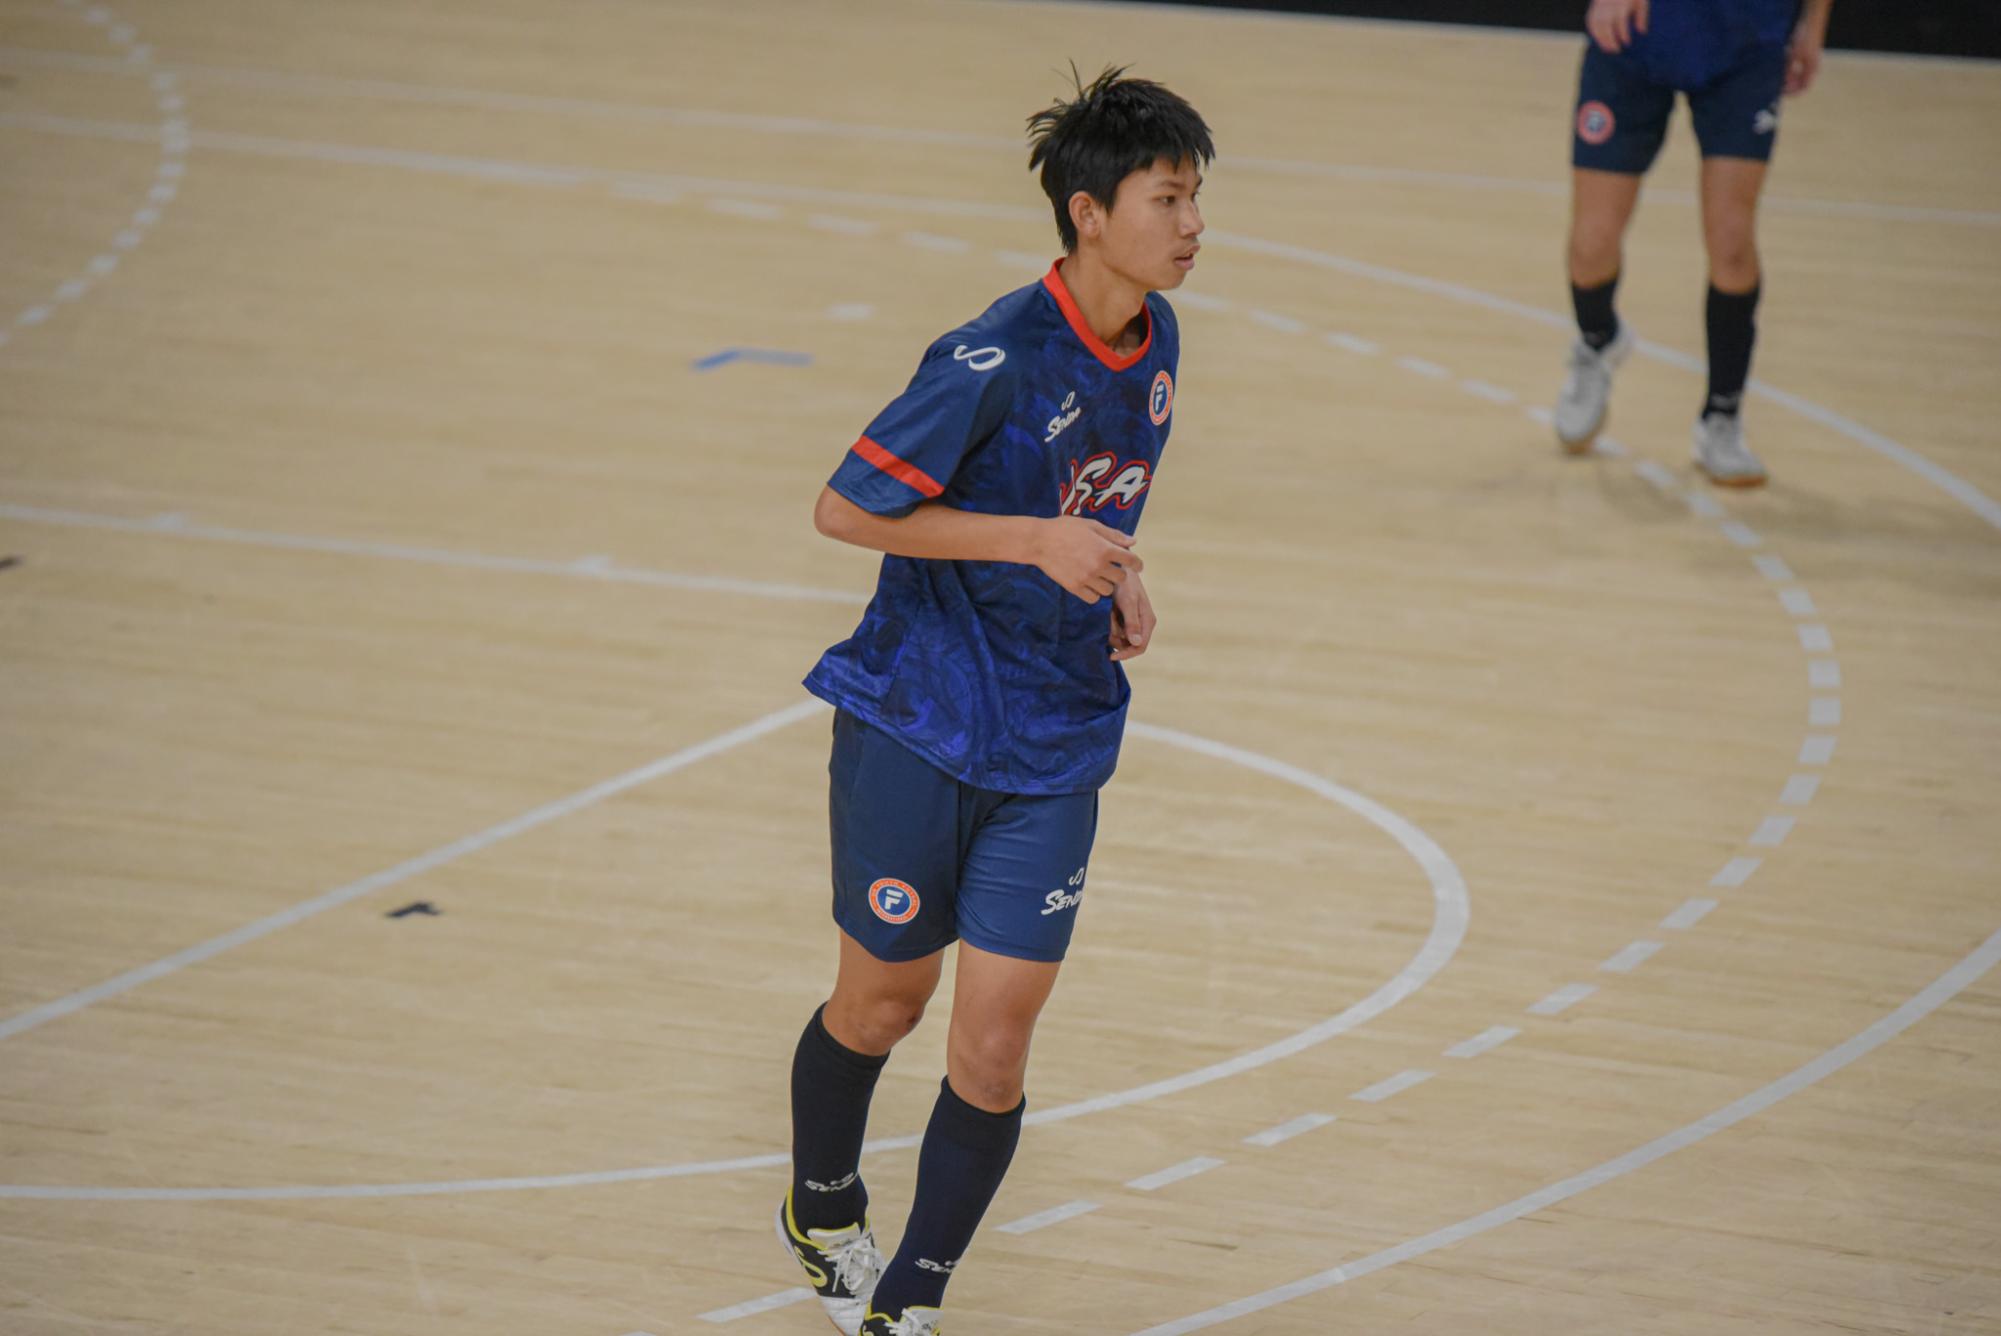 Kicking it in France: Chung plays in international futsal competition